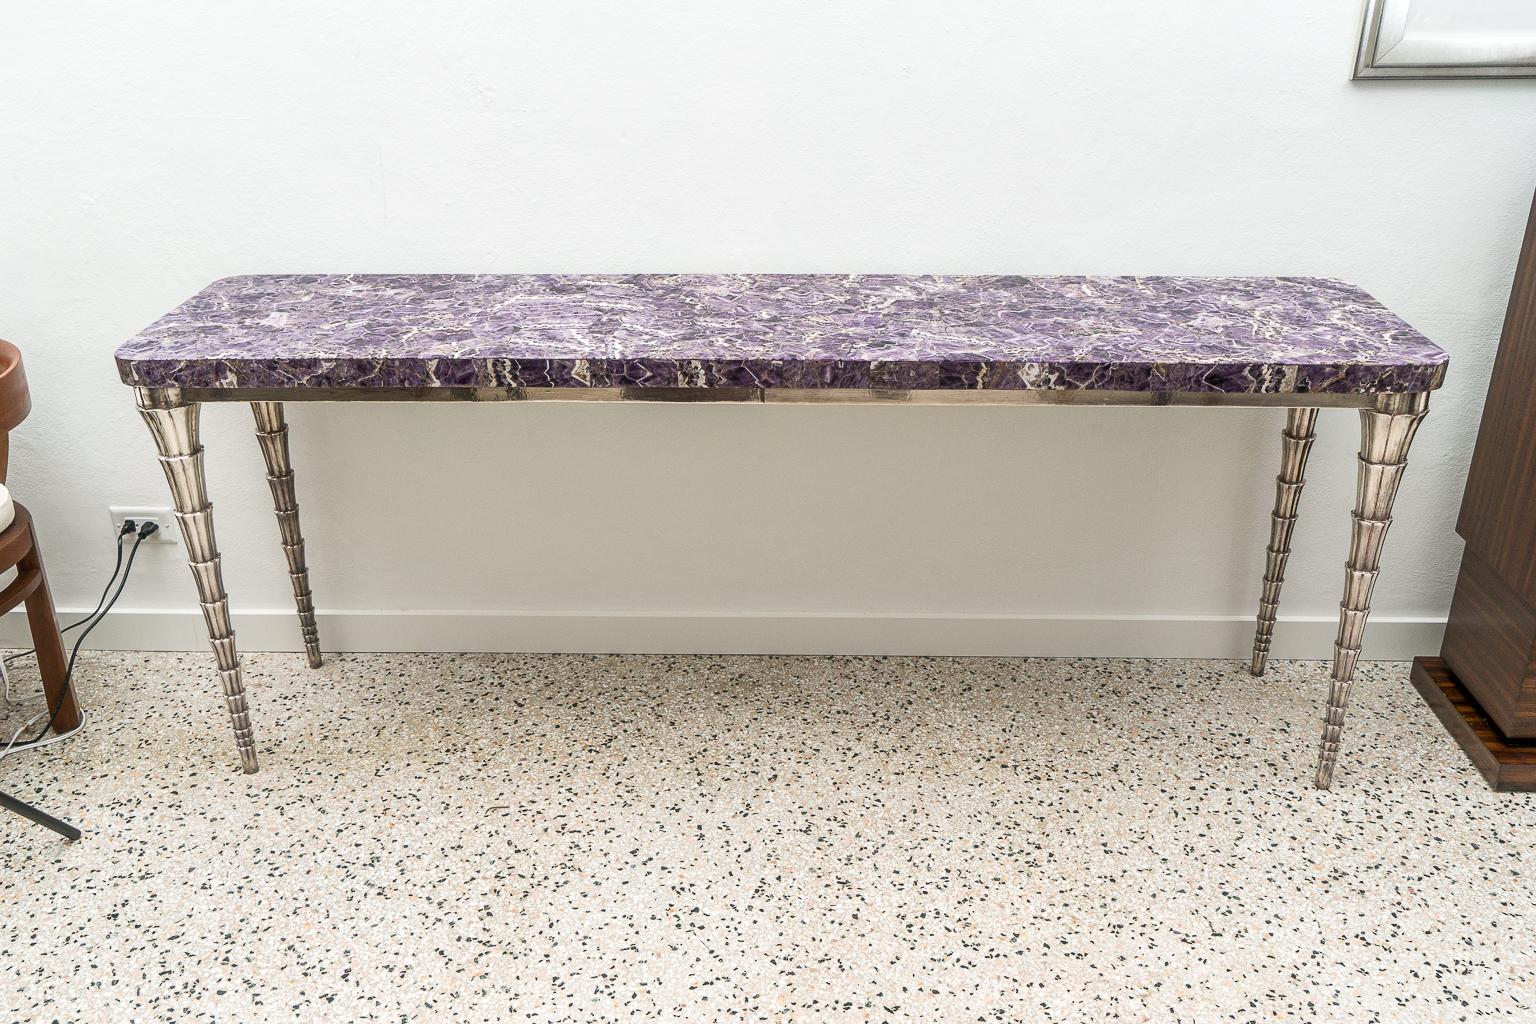 Cornet table designed by Paul Mathieu for the Stephanie Odegard Co. Ltd.

Hand carved teak console table is clad in pure silver and adorned with a purple and white accented abstract mosaic top. A modern interpretation of the Anglo-Indian style,